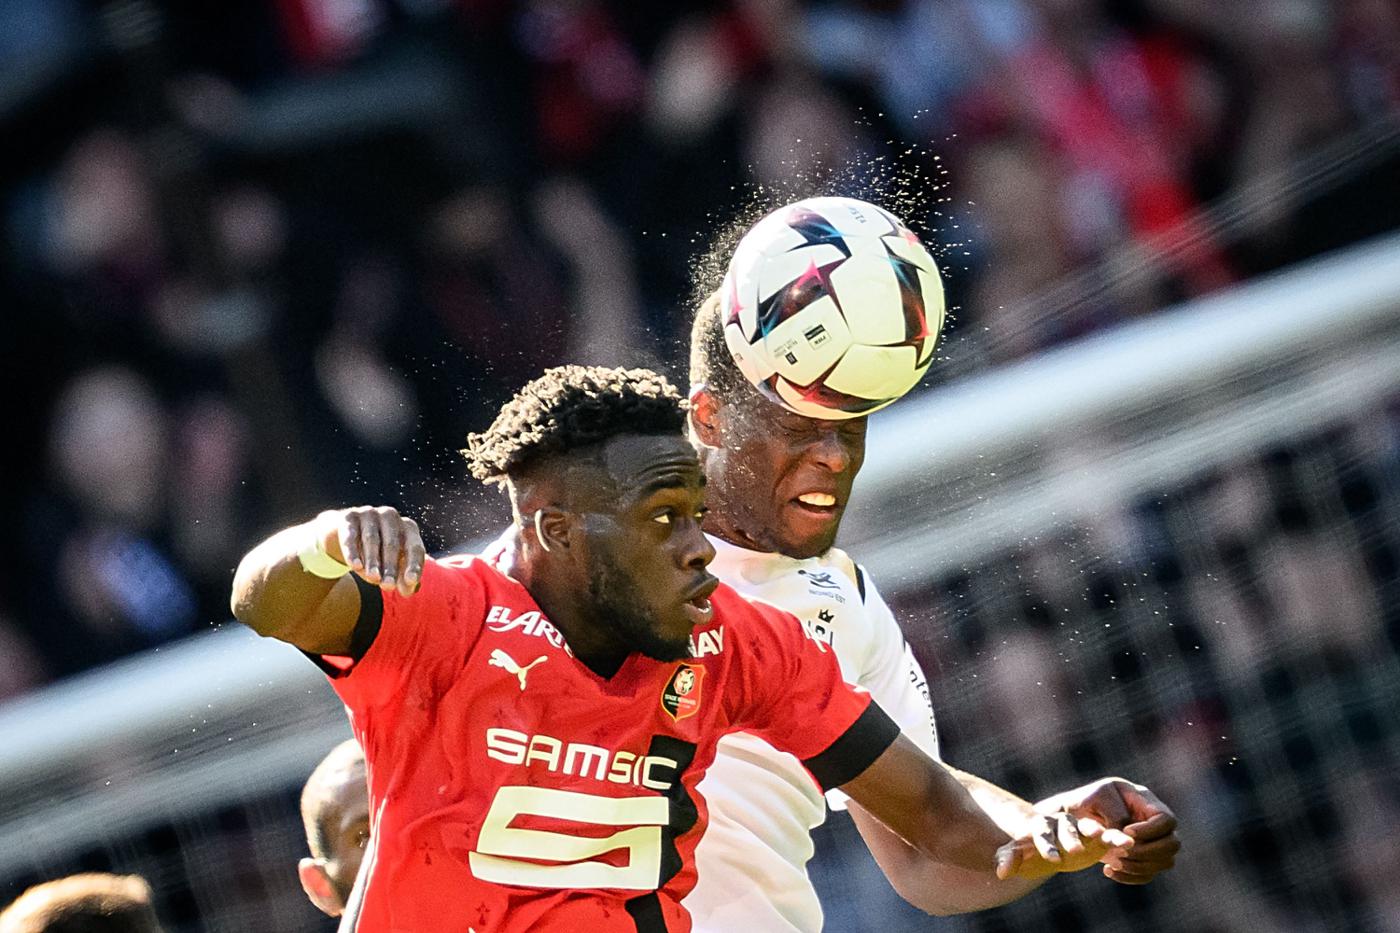 statistics Rennes - Reims - 3:0. French Championship, round 31. Overview of the match,